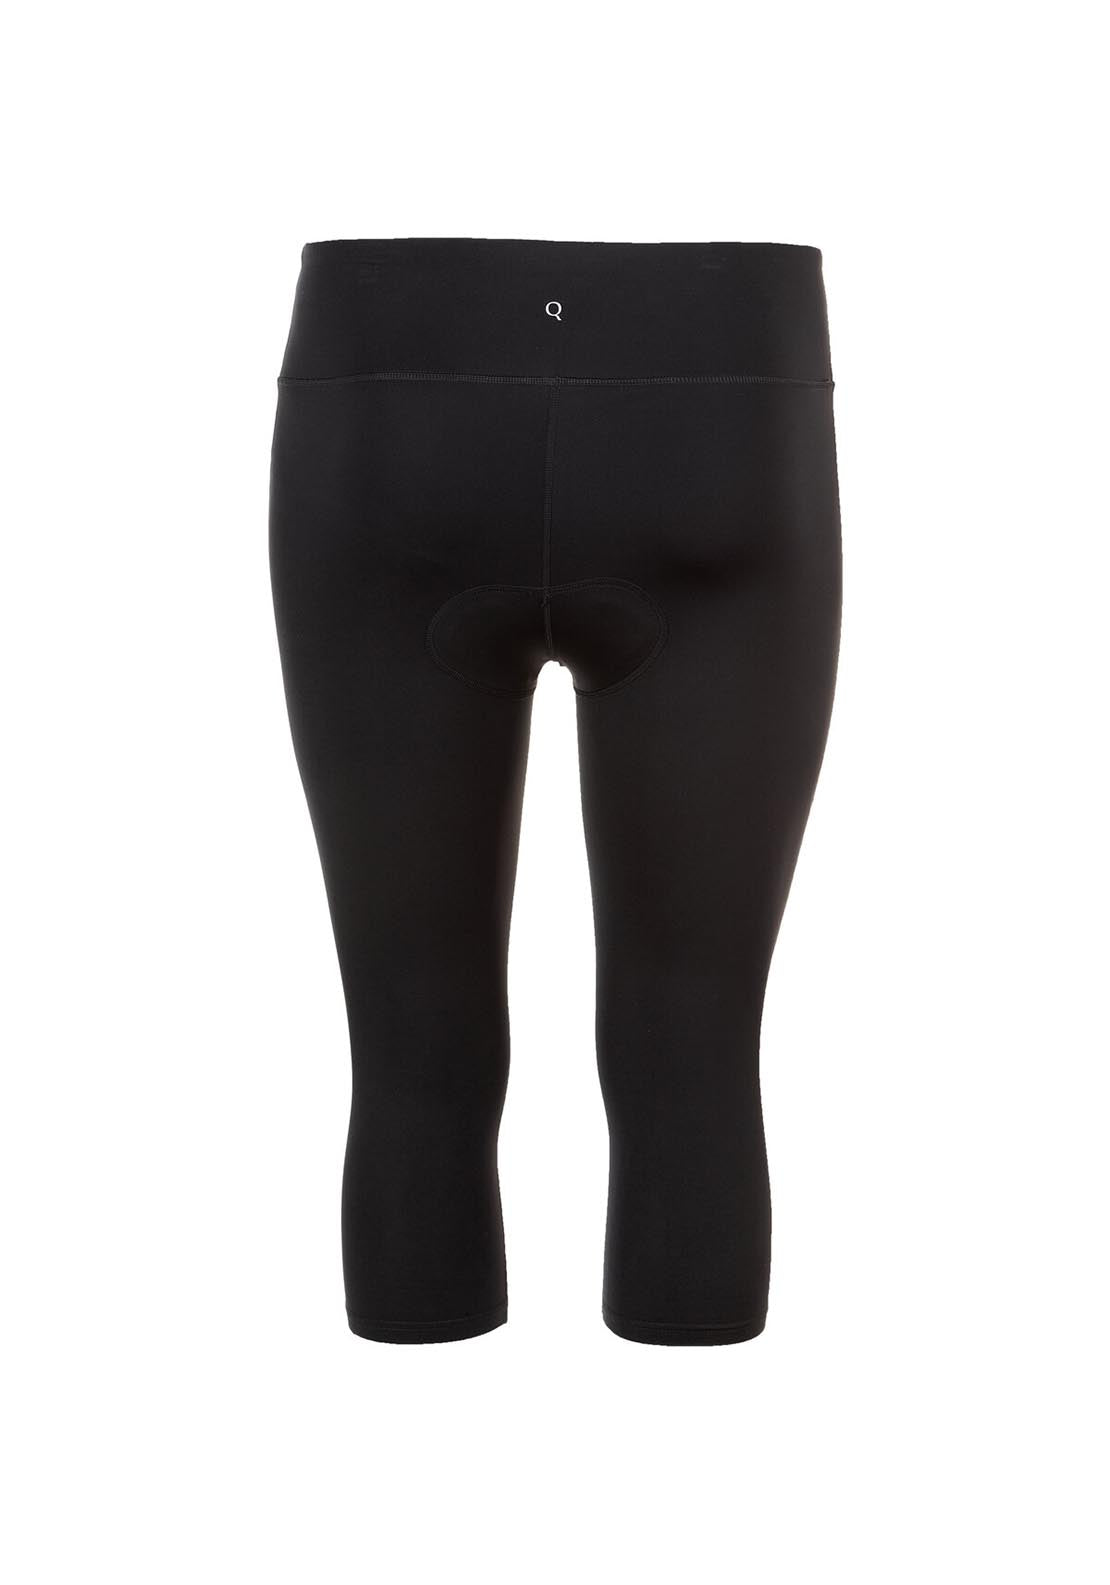 Q Kaisa Womens 3/4 Spin Tights - Black 7 Shaws Department Stores